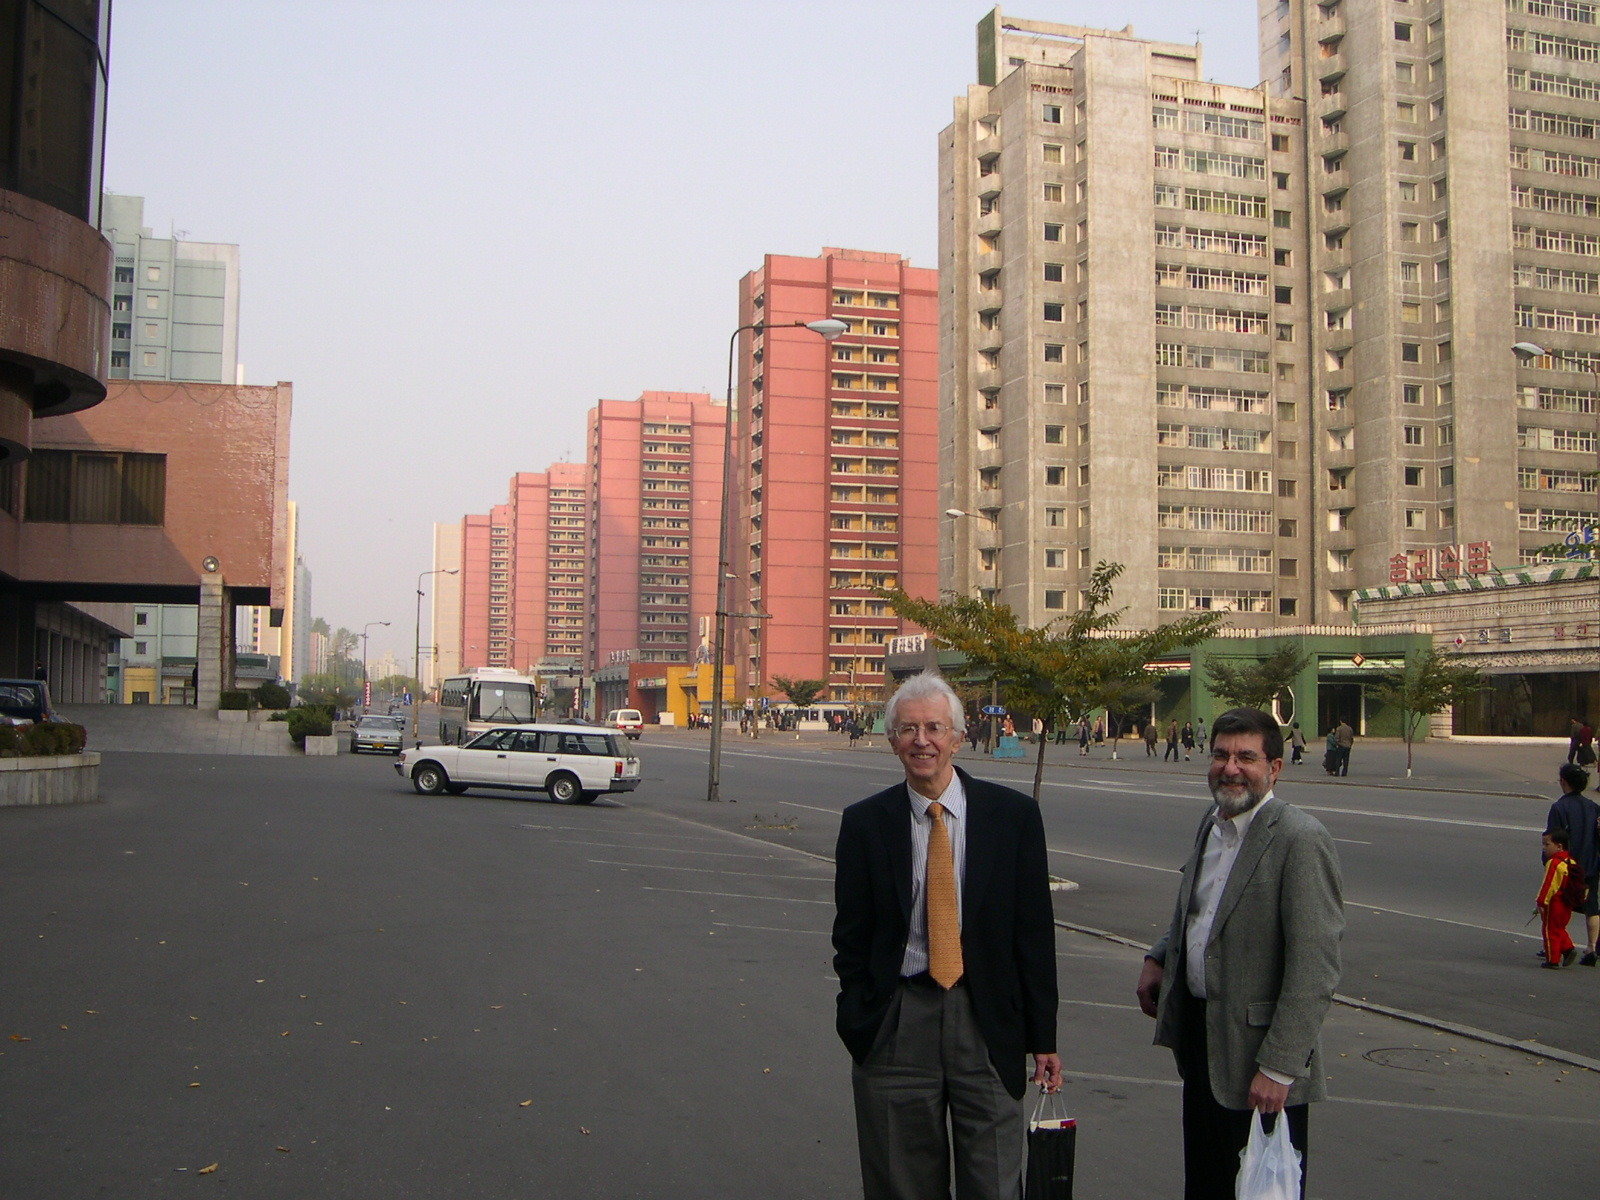 Two men with purchase bags standing on a broad side walk lined with high rise residential buildings